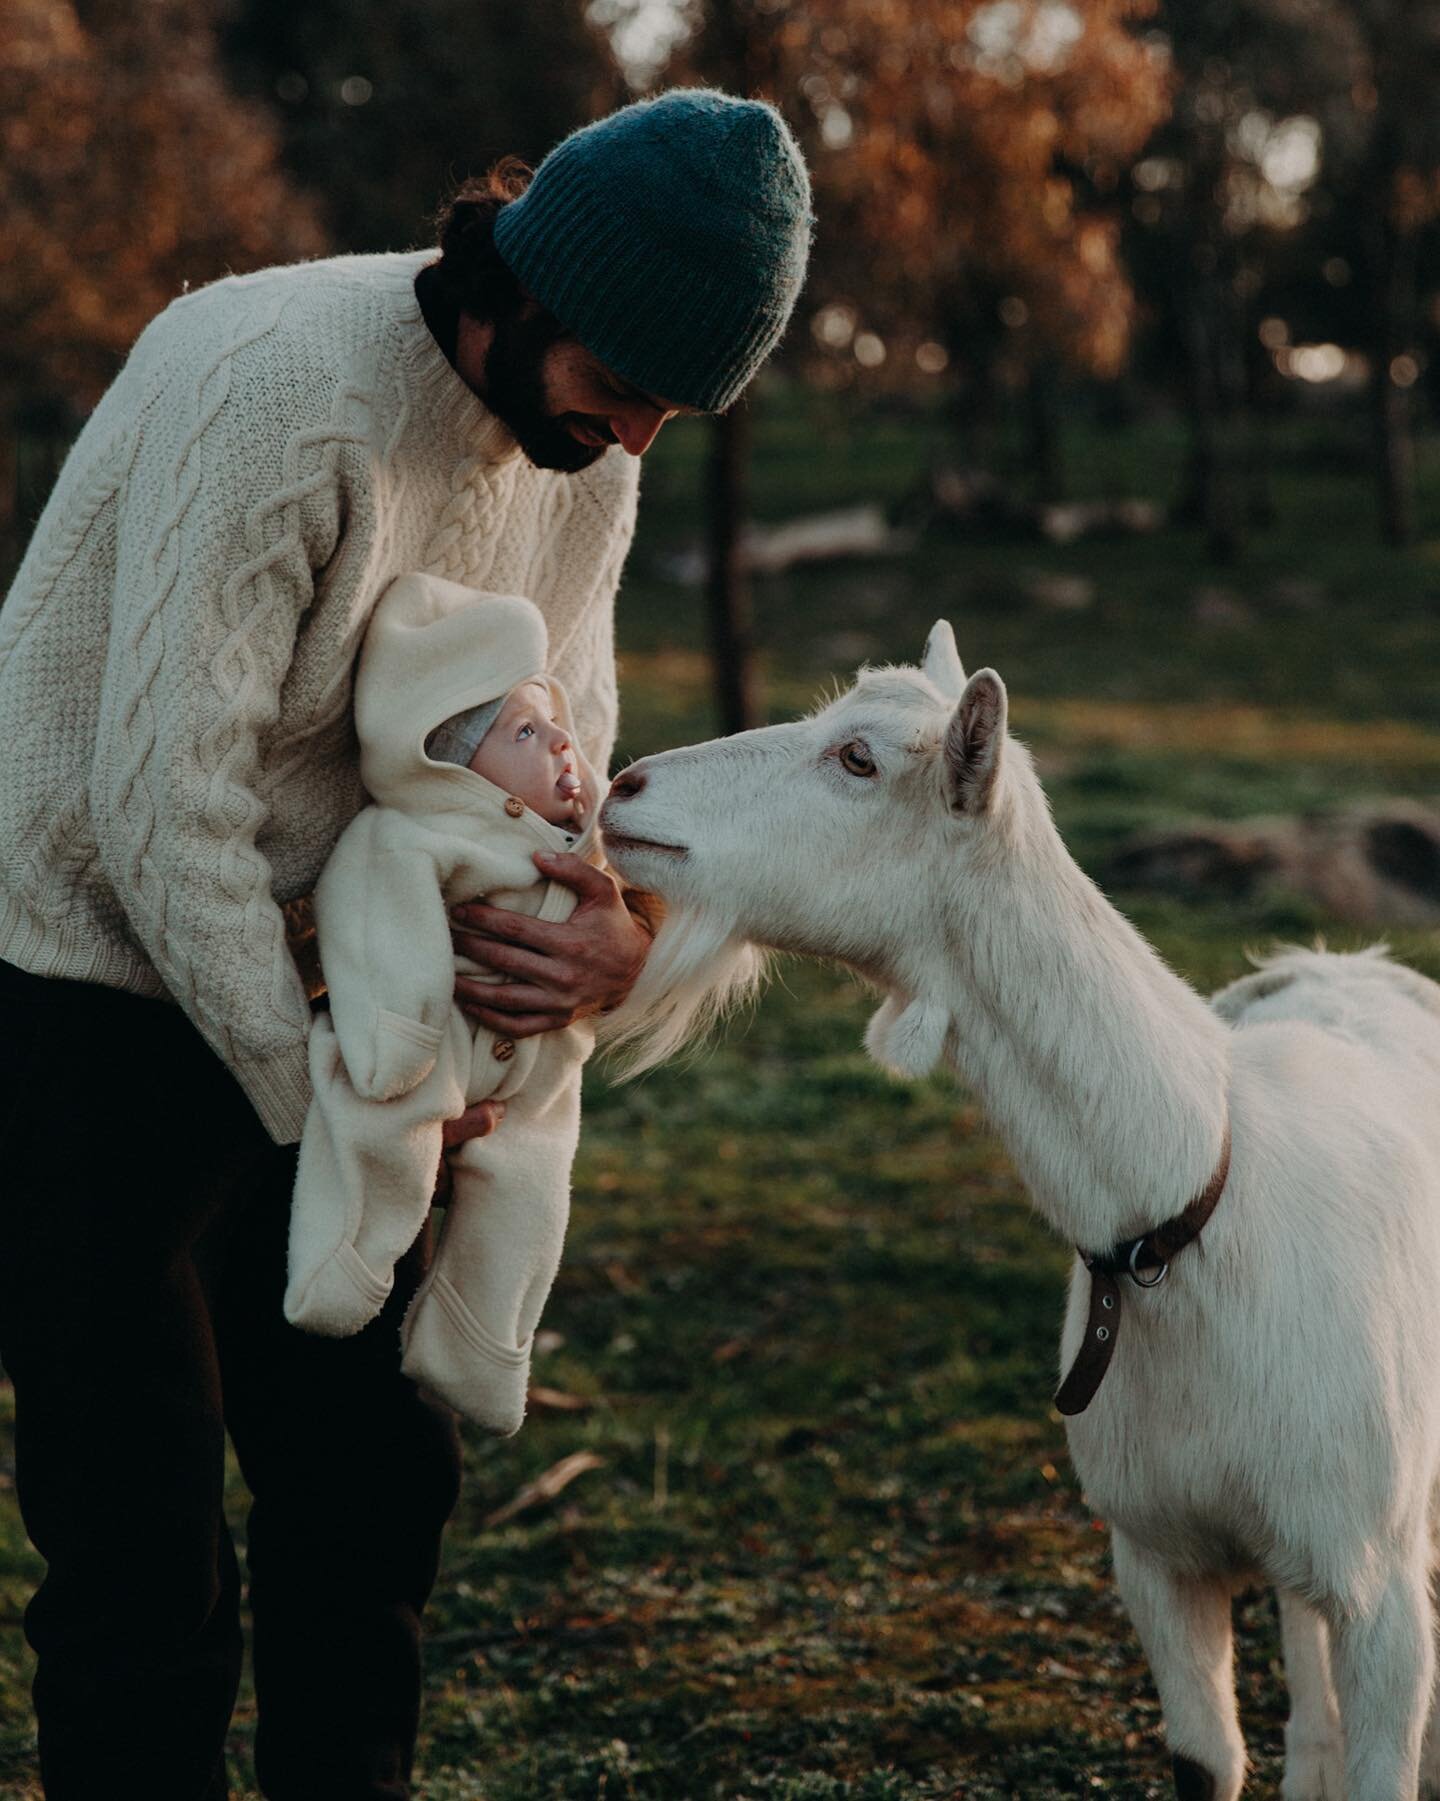 Our little polar bear meeting Manny the goat 🥰

Reality: yes we have lovely moments witnessing you smile and make the cutest cooing sounds and taking you on walks to visit the goats. But there are also many moments of holding you as you cry hoping y